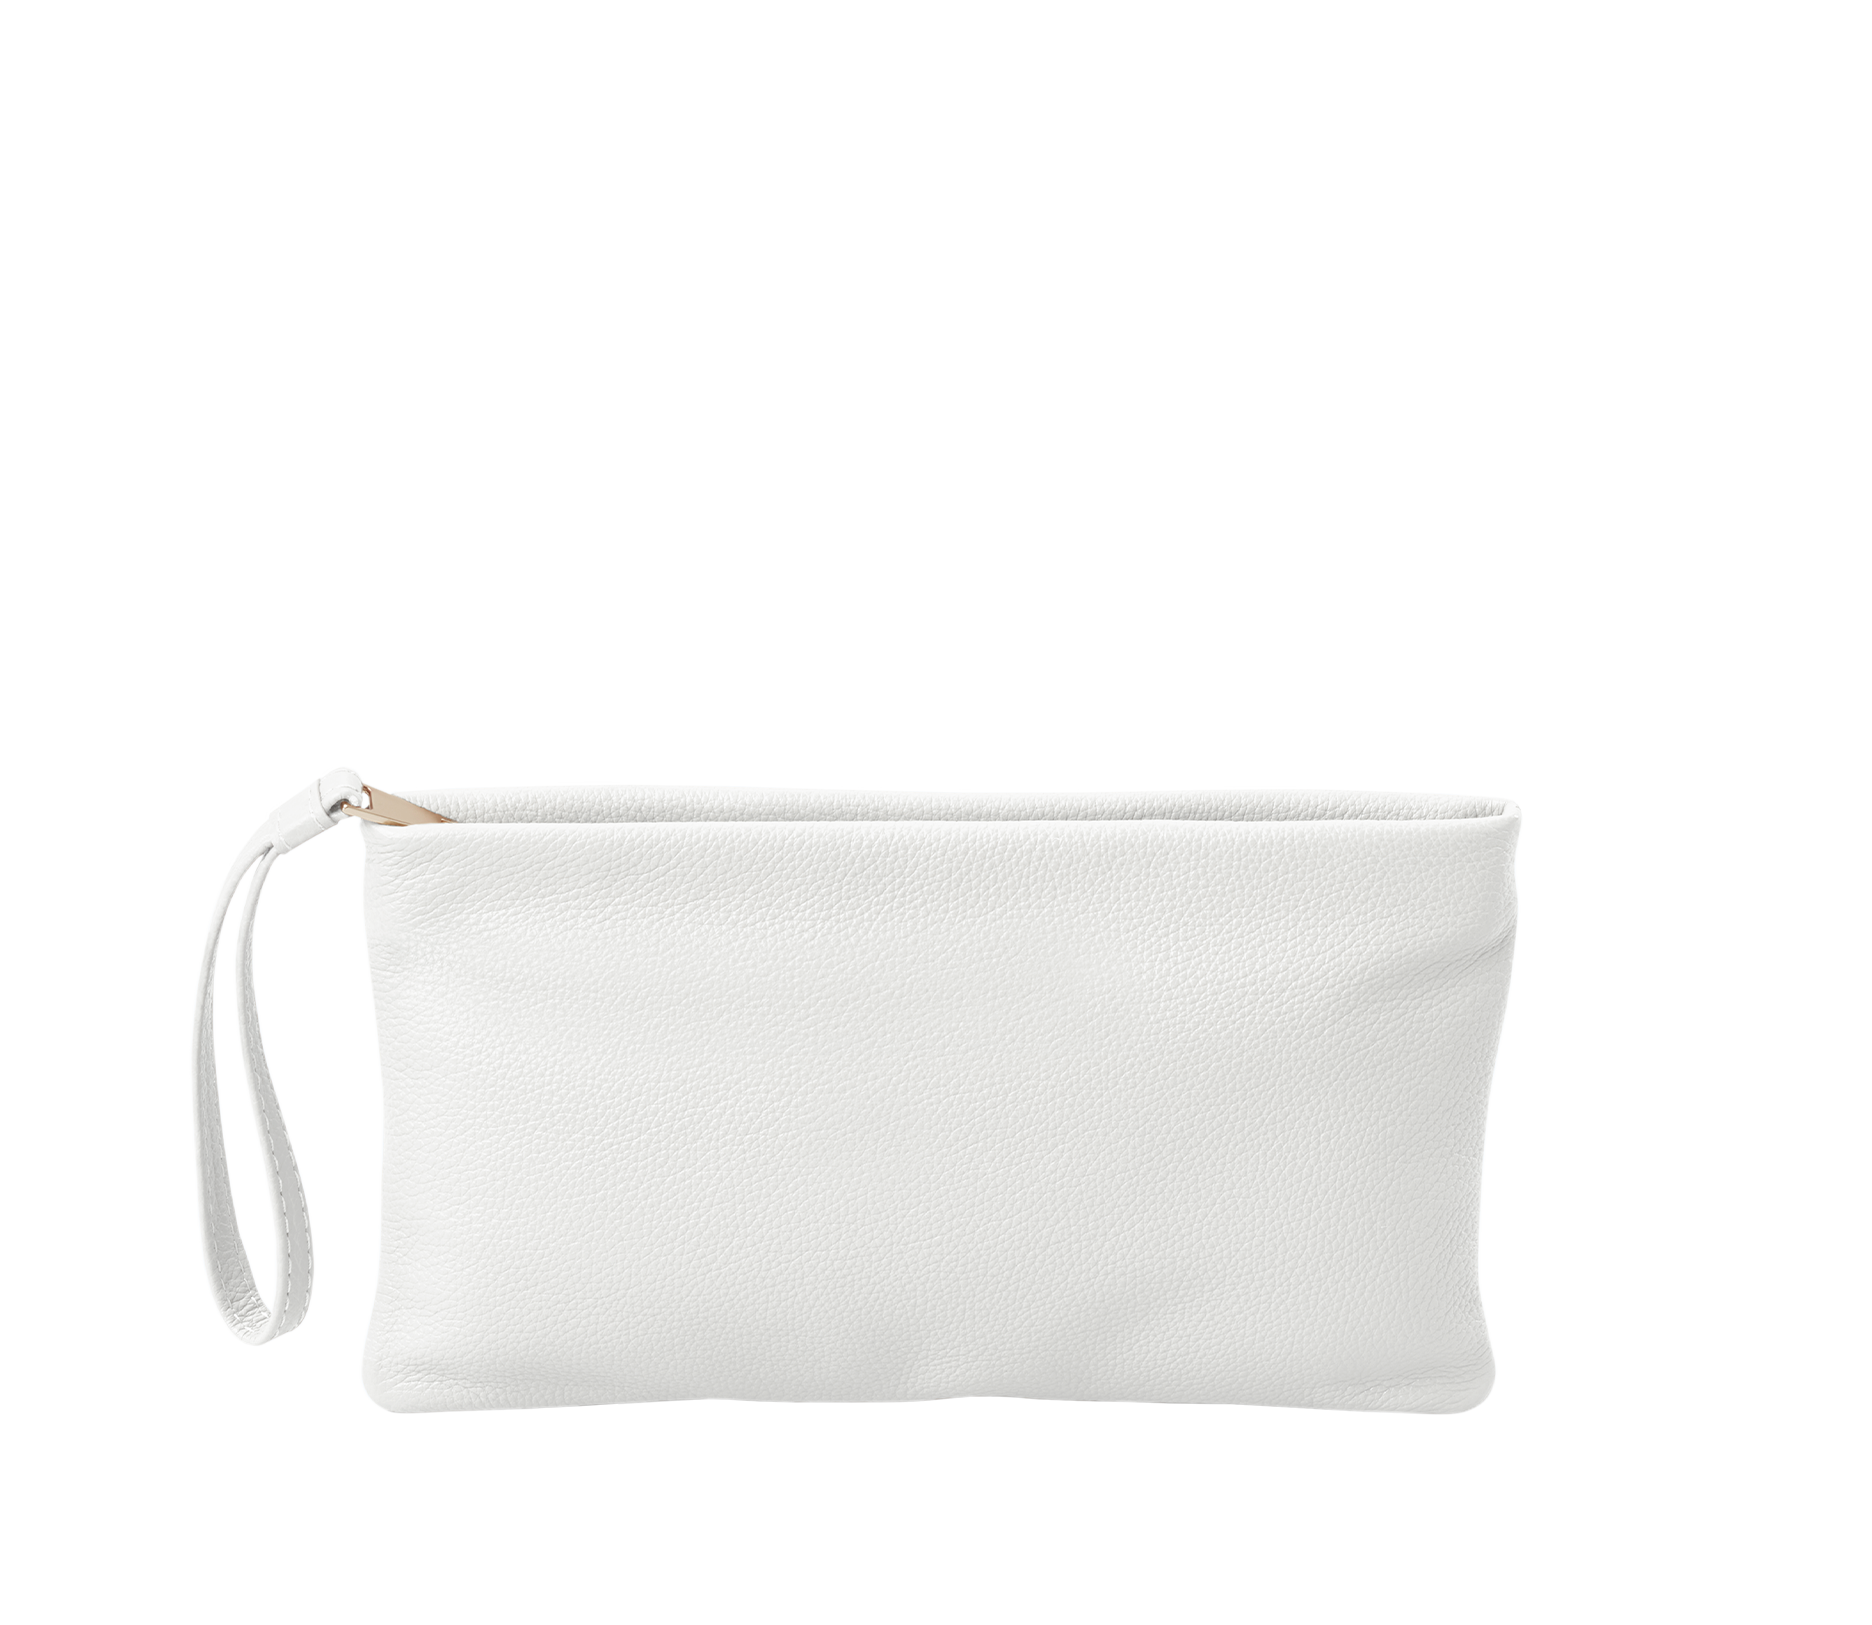 Alexis Travel Clutch in Pearl